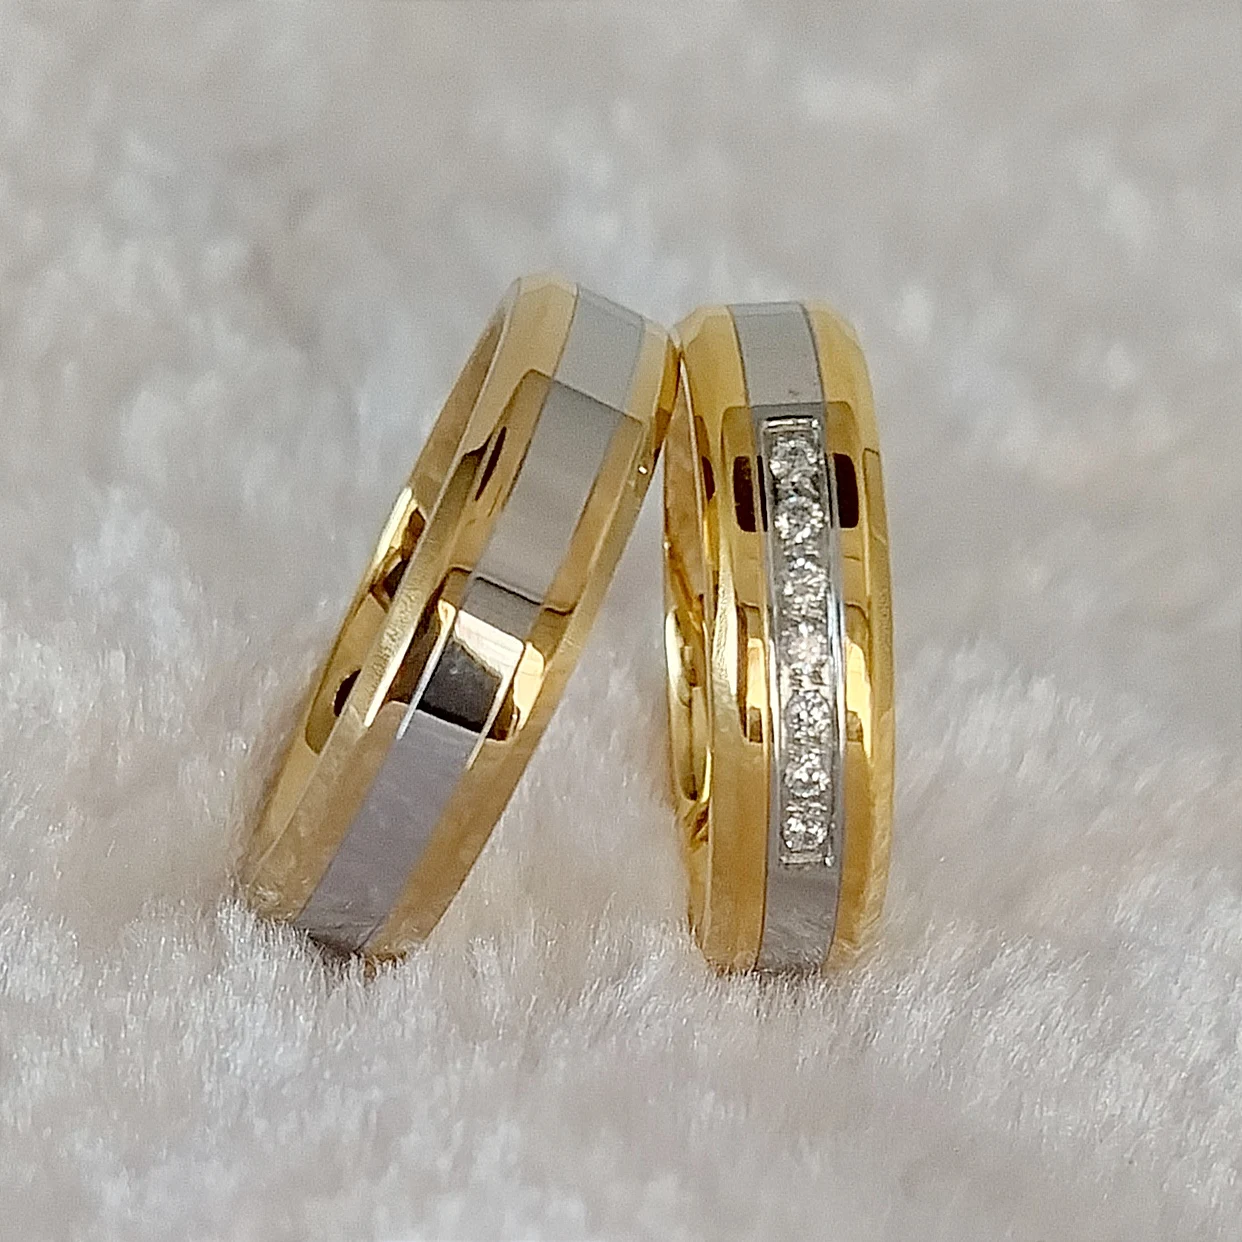 

High Quality cz stones Lovers Marriage Promise Wedding Rings sets for Couples Western 18k Gold Plated stainless steel jewelry